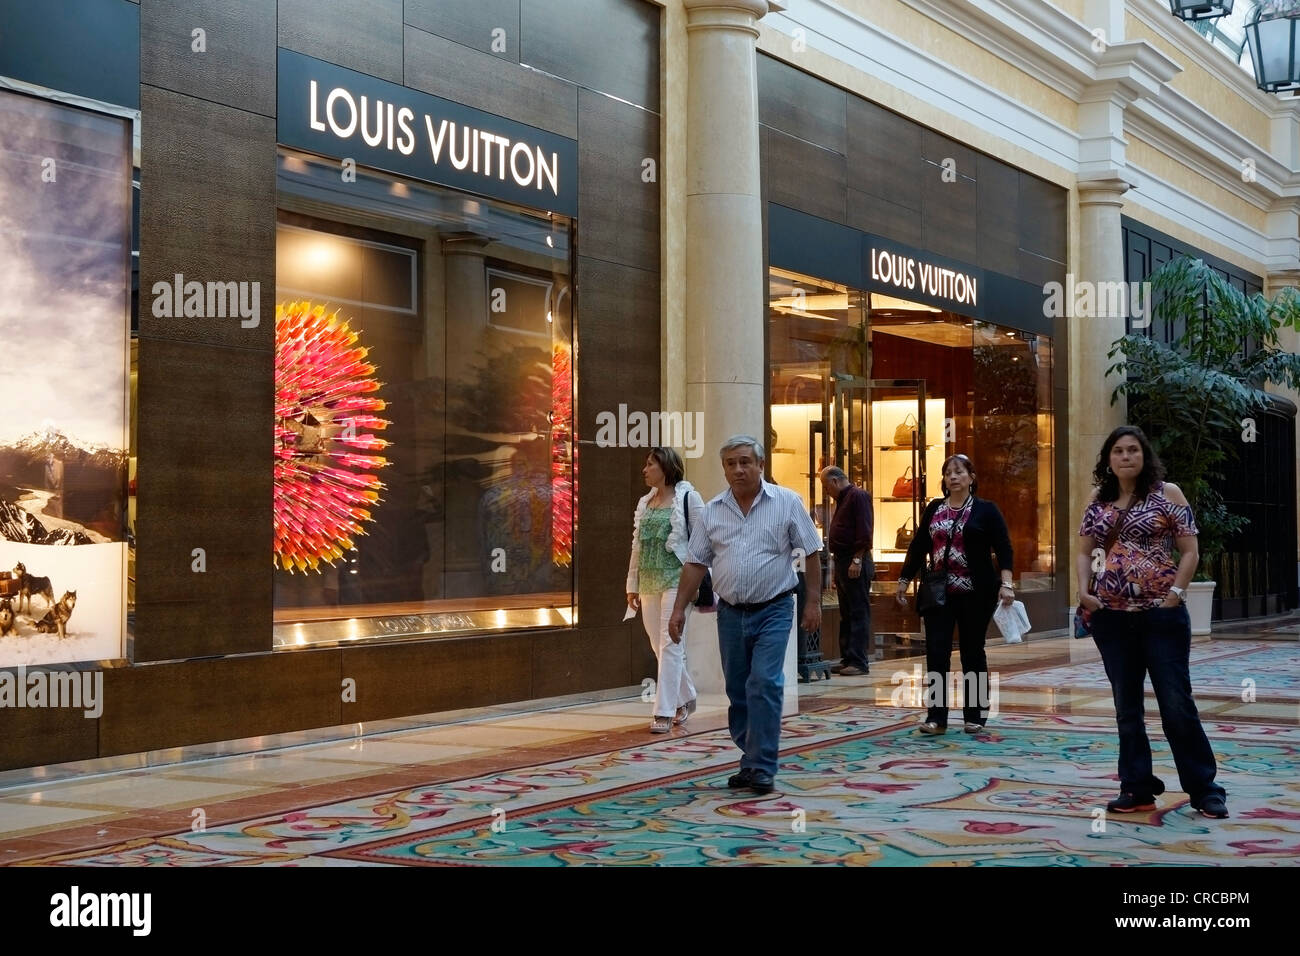 Louis Vuitton (the Shops At Crystals)